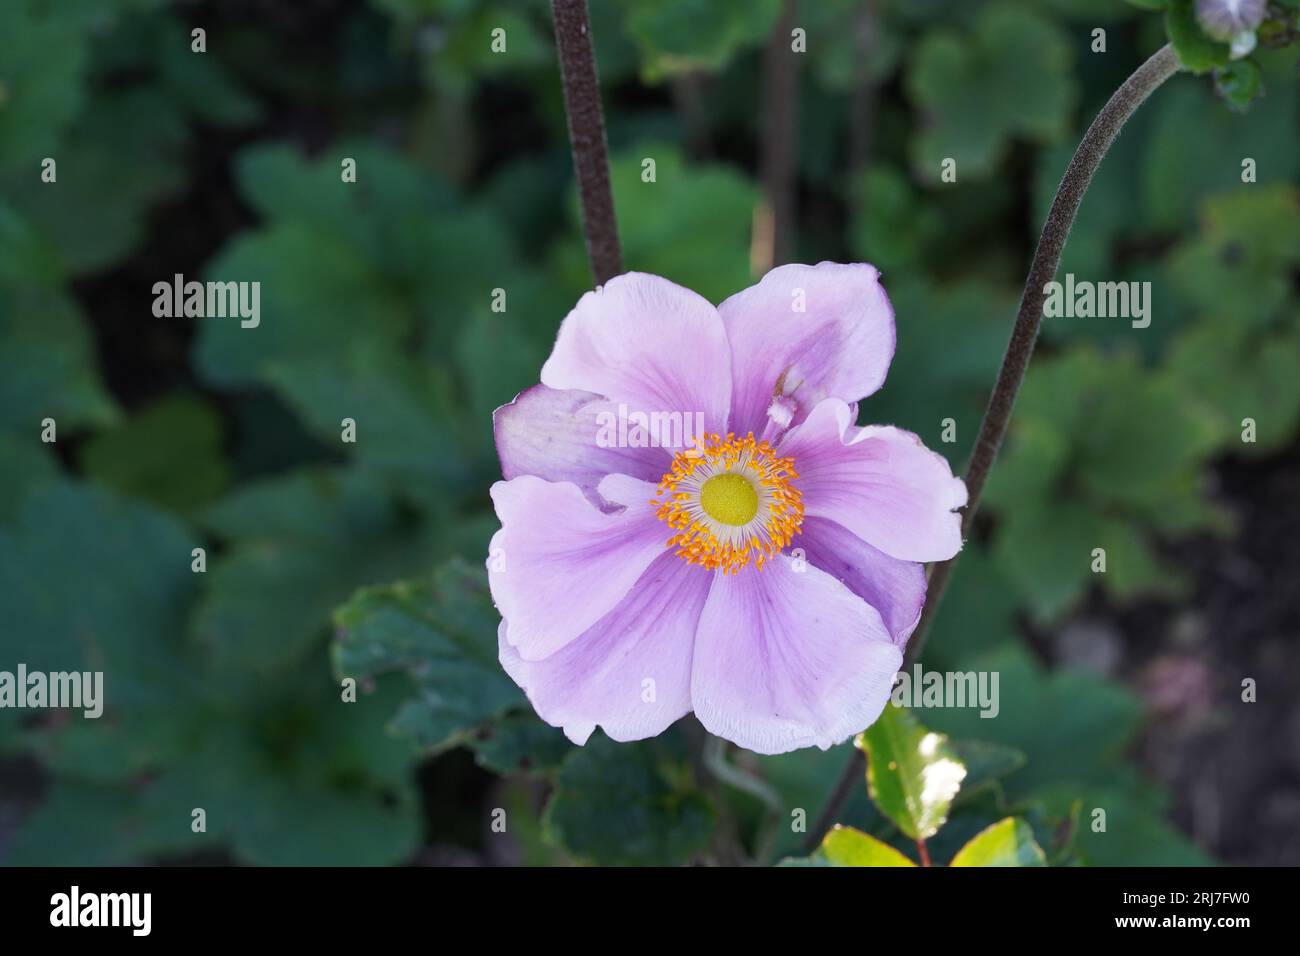 Windflower, in Latin called anemone plant in blossom. The flower has pale lila petals. There are defocused leaves and stems on the background. Stock Photo